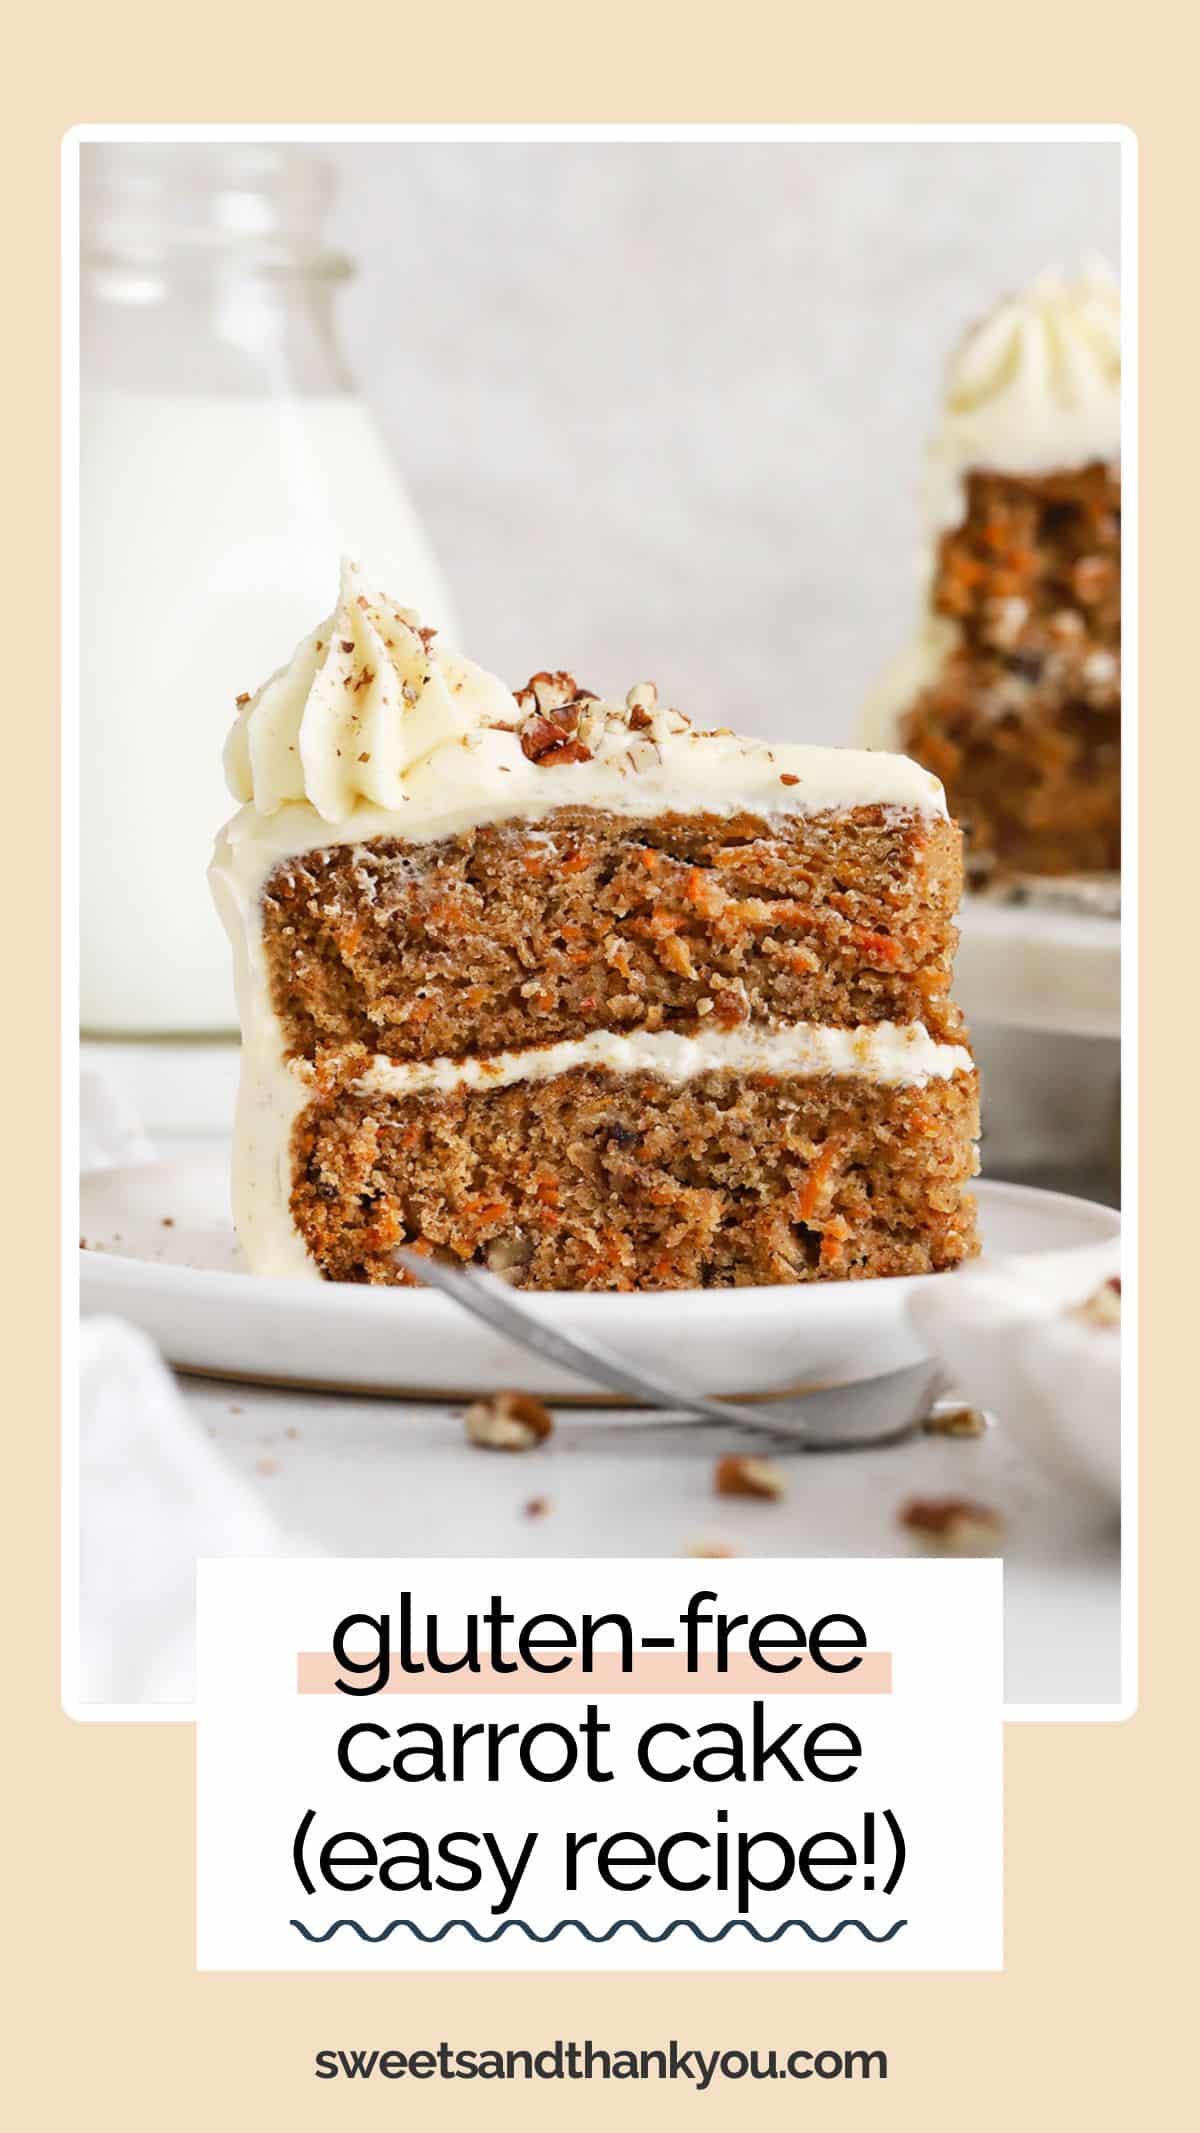 Our soft, fluffy Gluten-Free Carrot Cake recipe is made with two beautiful layers and an easy cream cheese frosting that make it feel special for any occasion. This carrot layer cake is the perfect gluten-free Easter dessert or spring treat for baby showers, spring parties, or celebrations. It's also an amazing gluten-free birthday cake! Don't miss our tips for decorating in the post!